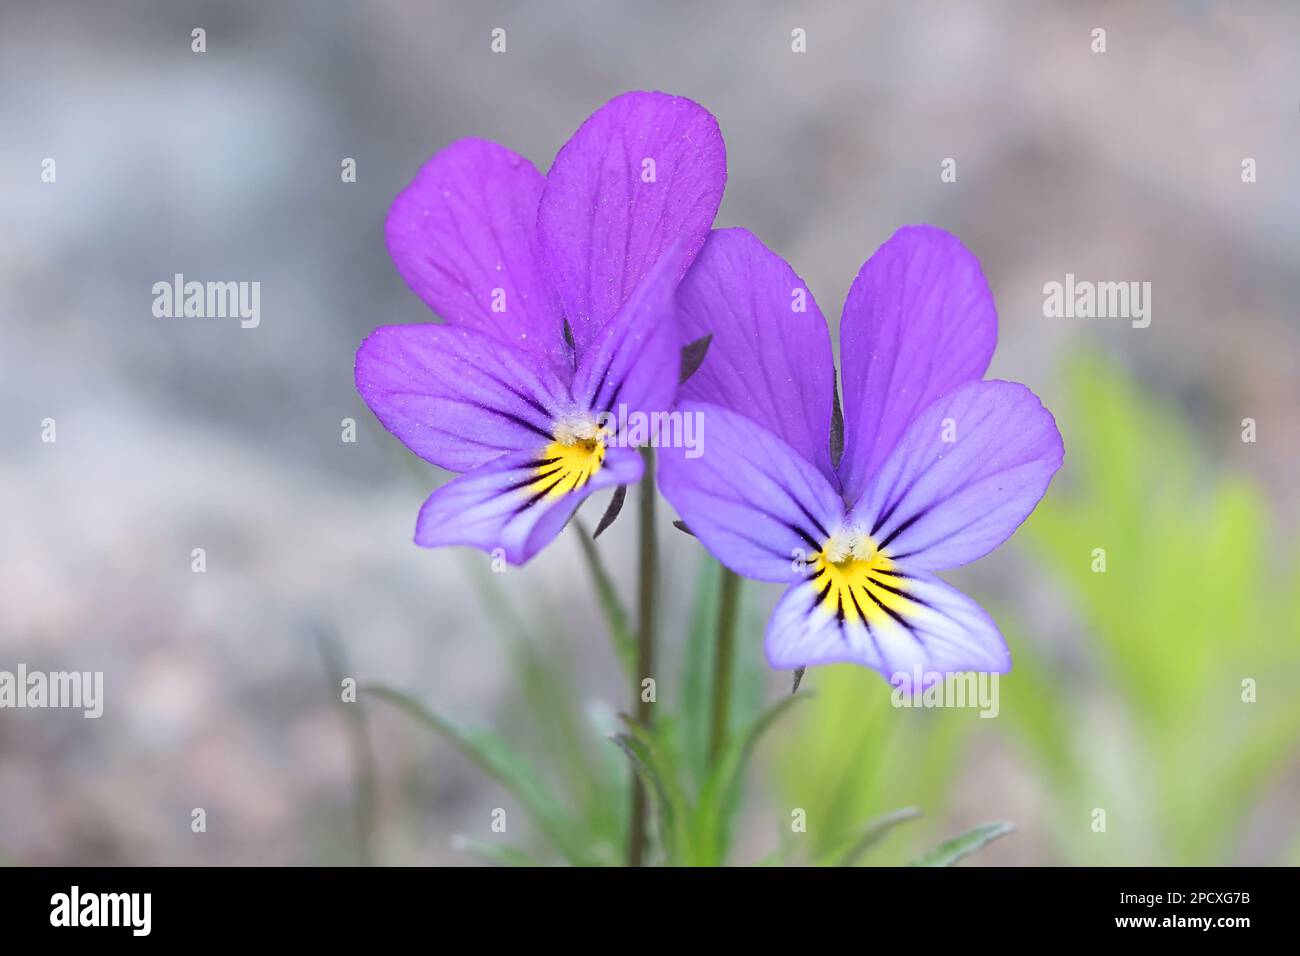 Viola tricolor, commonly knoen as wild pansy, Johnny Jump up, heartsease, heart's delight or tickle-my-fancy, wild flower from Finland Stock Photo